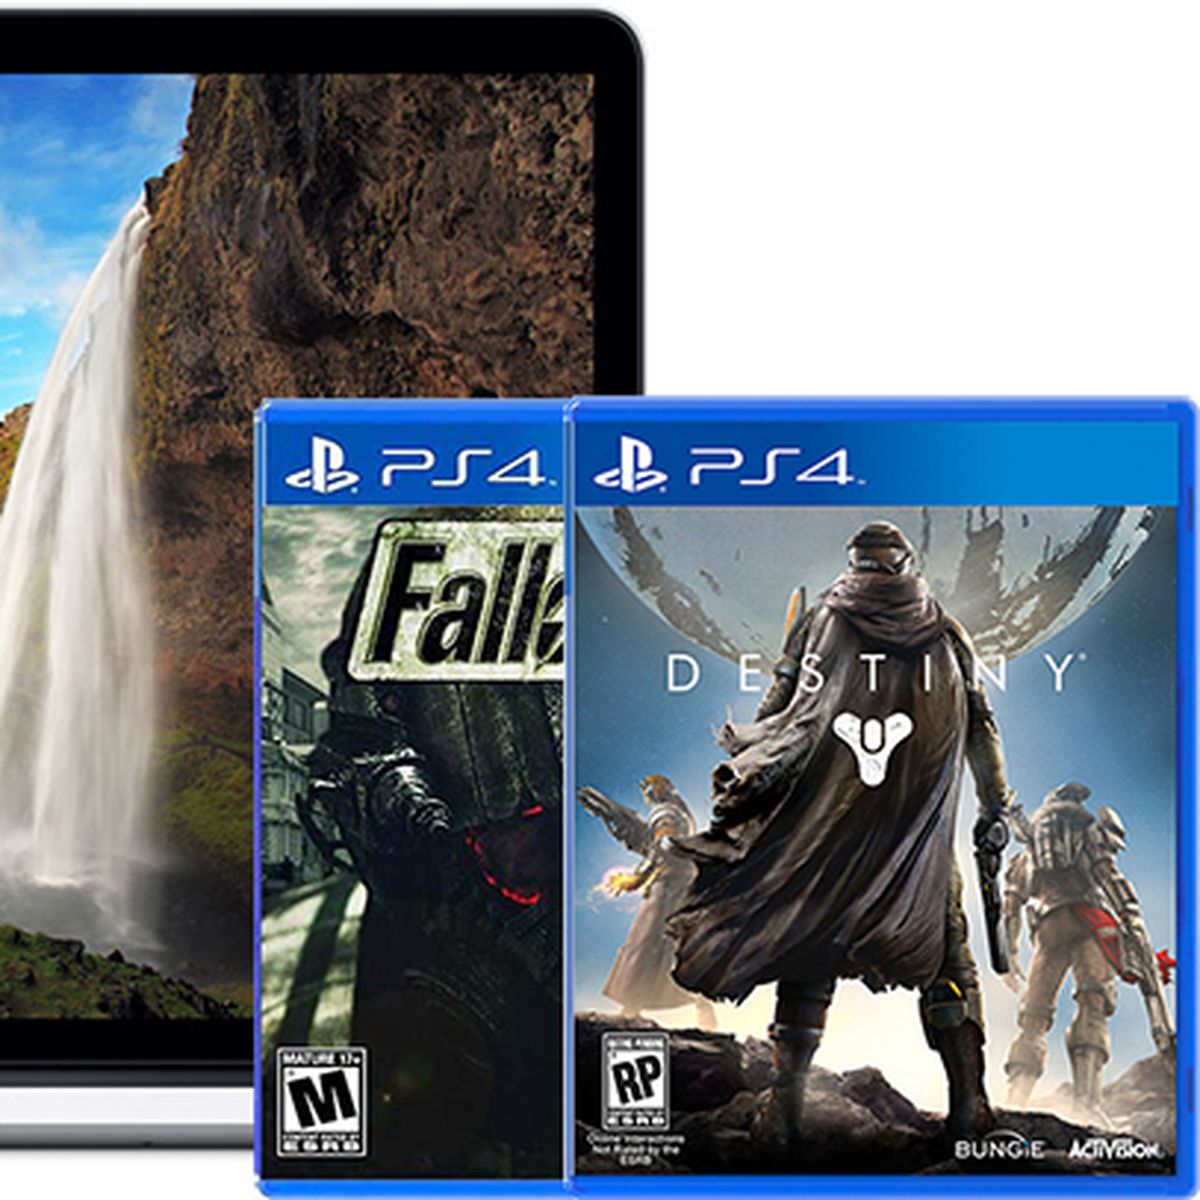 Sony Working on App to Stream PS4 Games on Mac and - MacRumors